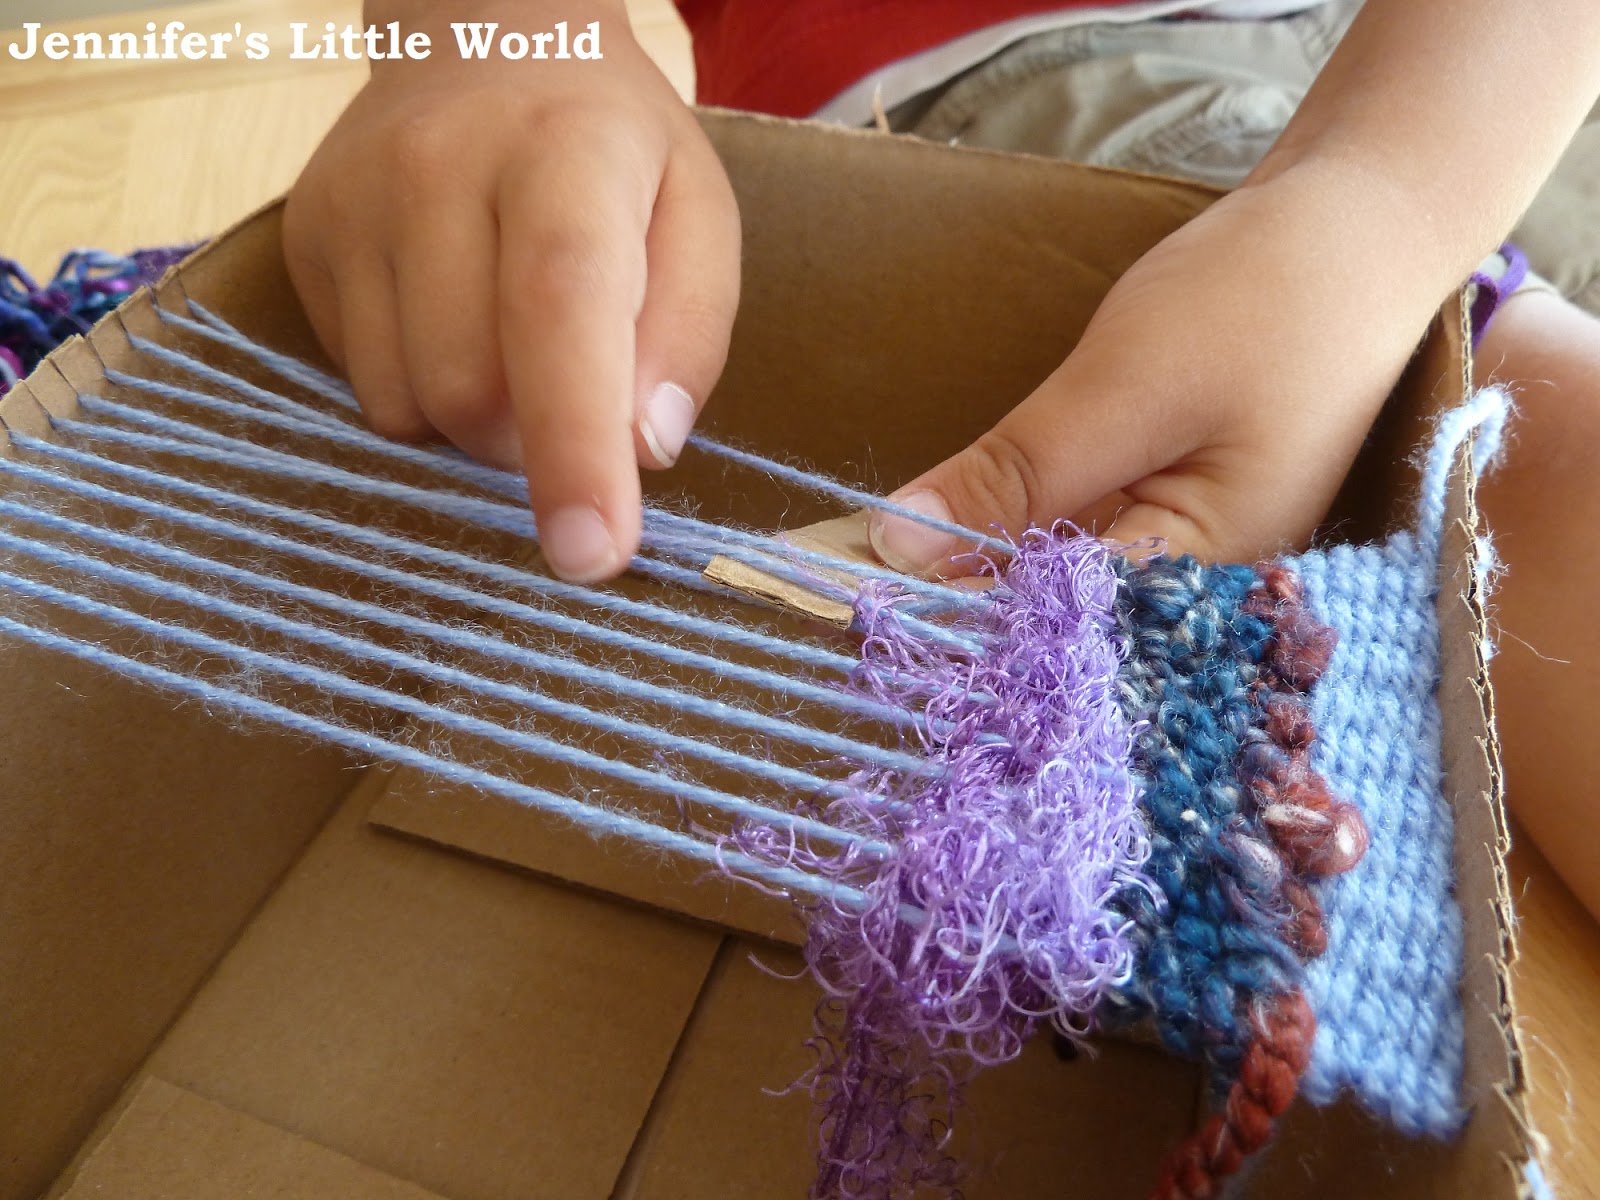 How to Make Cardboard Looms for Kids